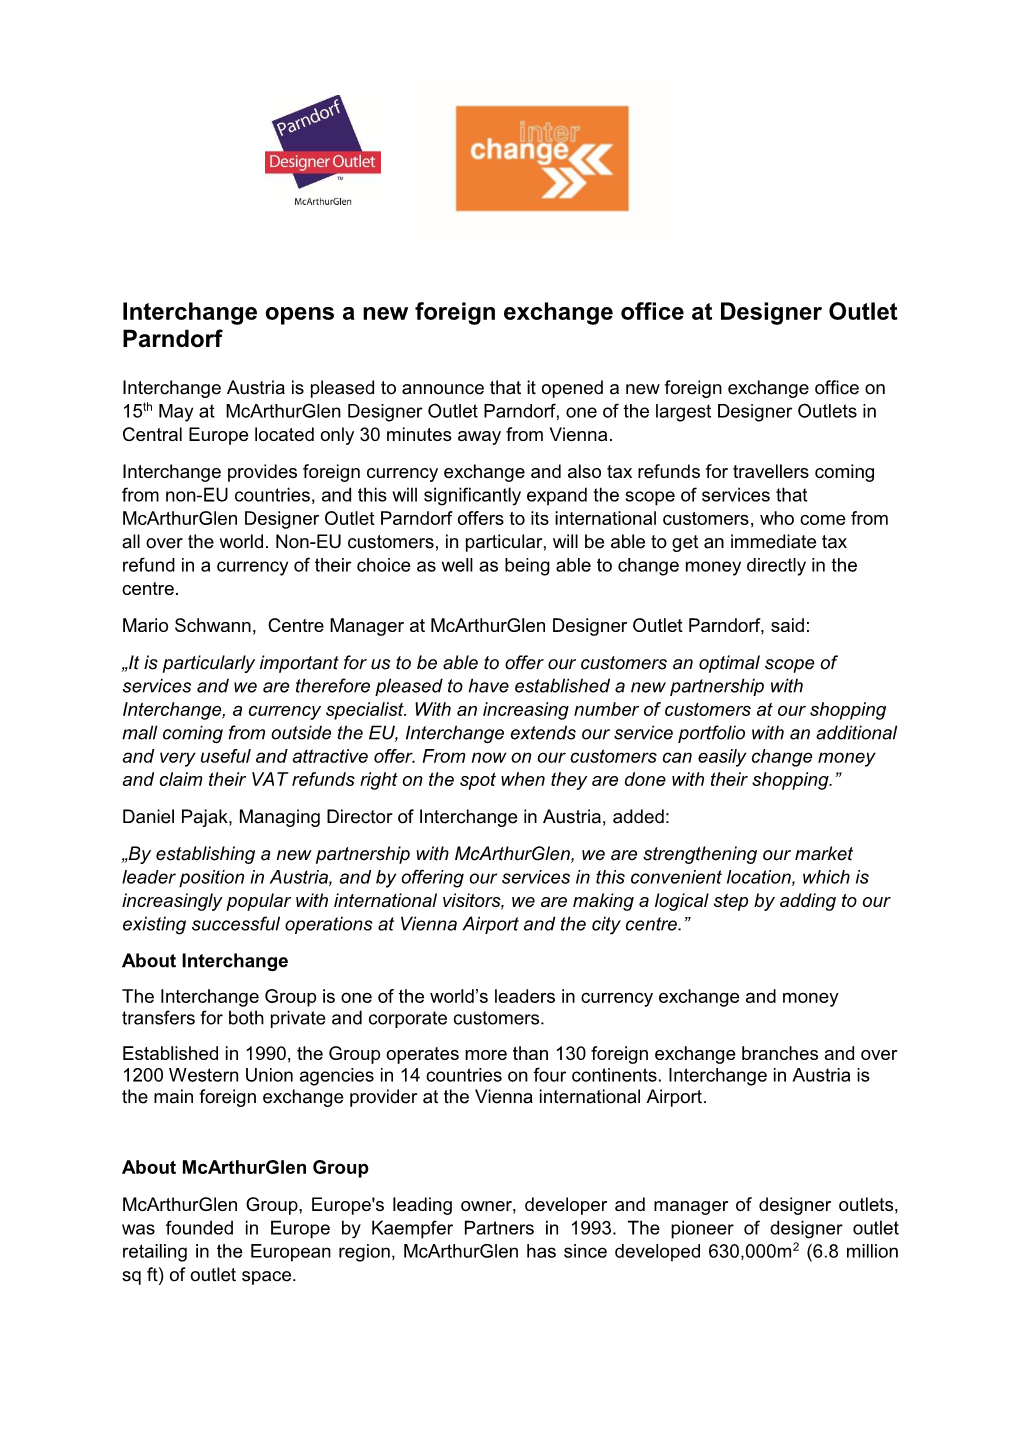 Interchange Opens a New Foreign Exchange Office at Designer Outlet Parndorf